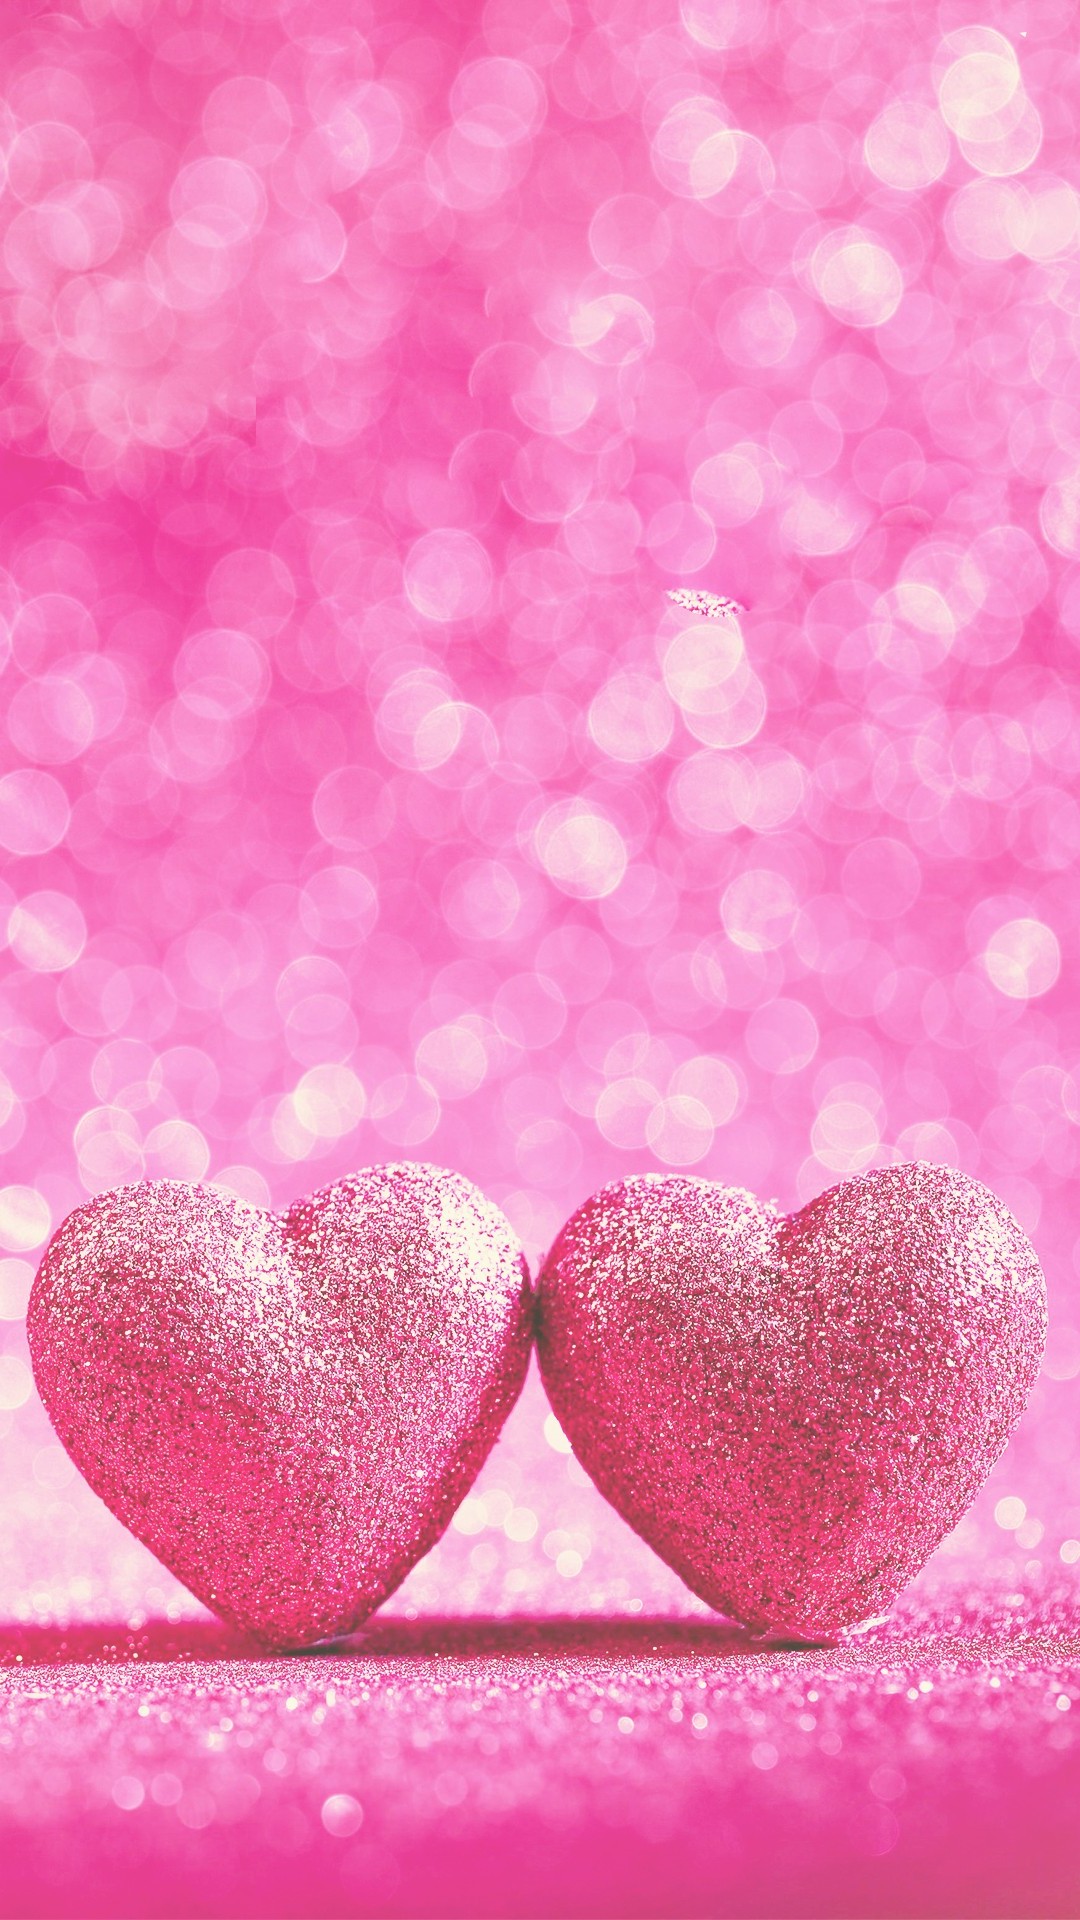 Pink Love Wallpaper Android   2019 Android Wallpapers